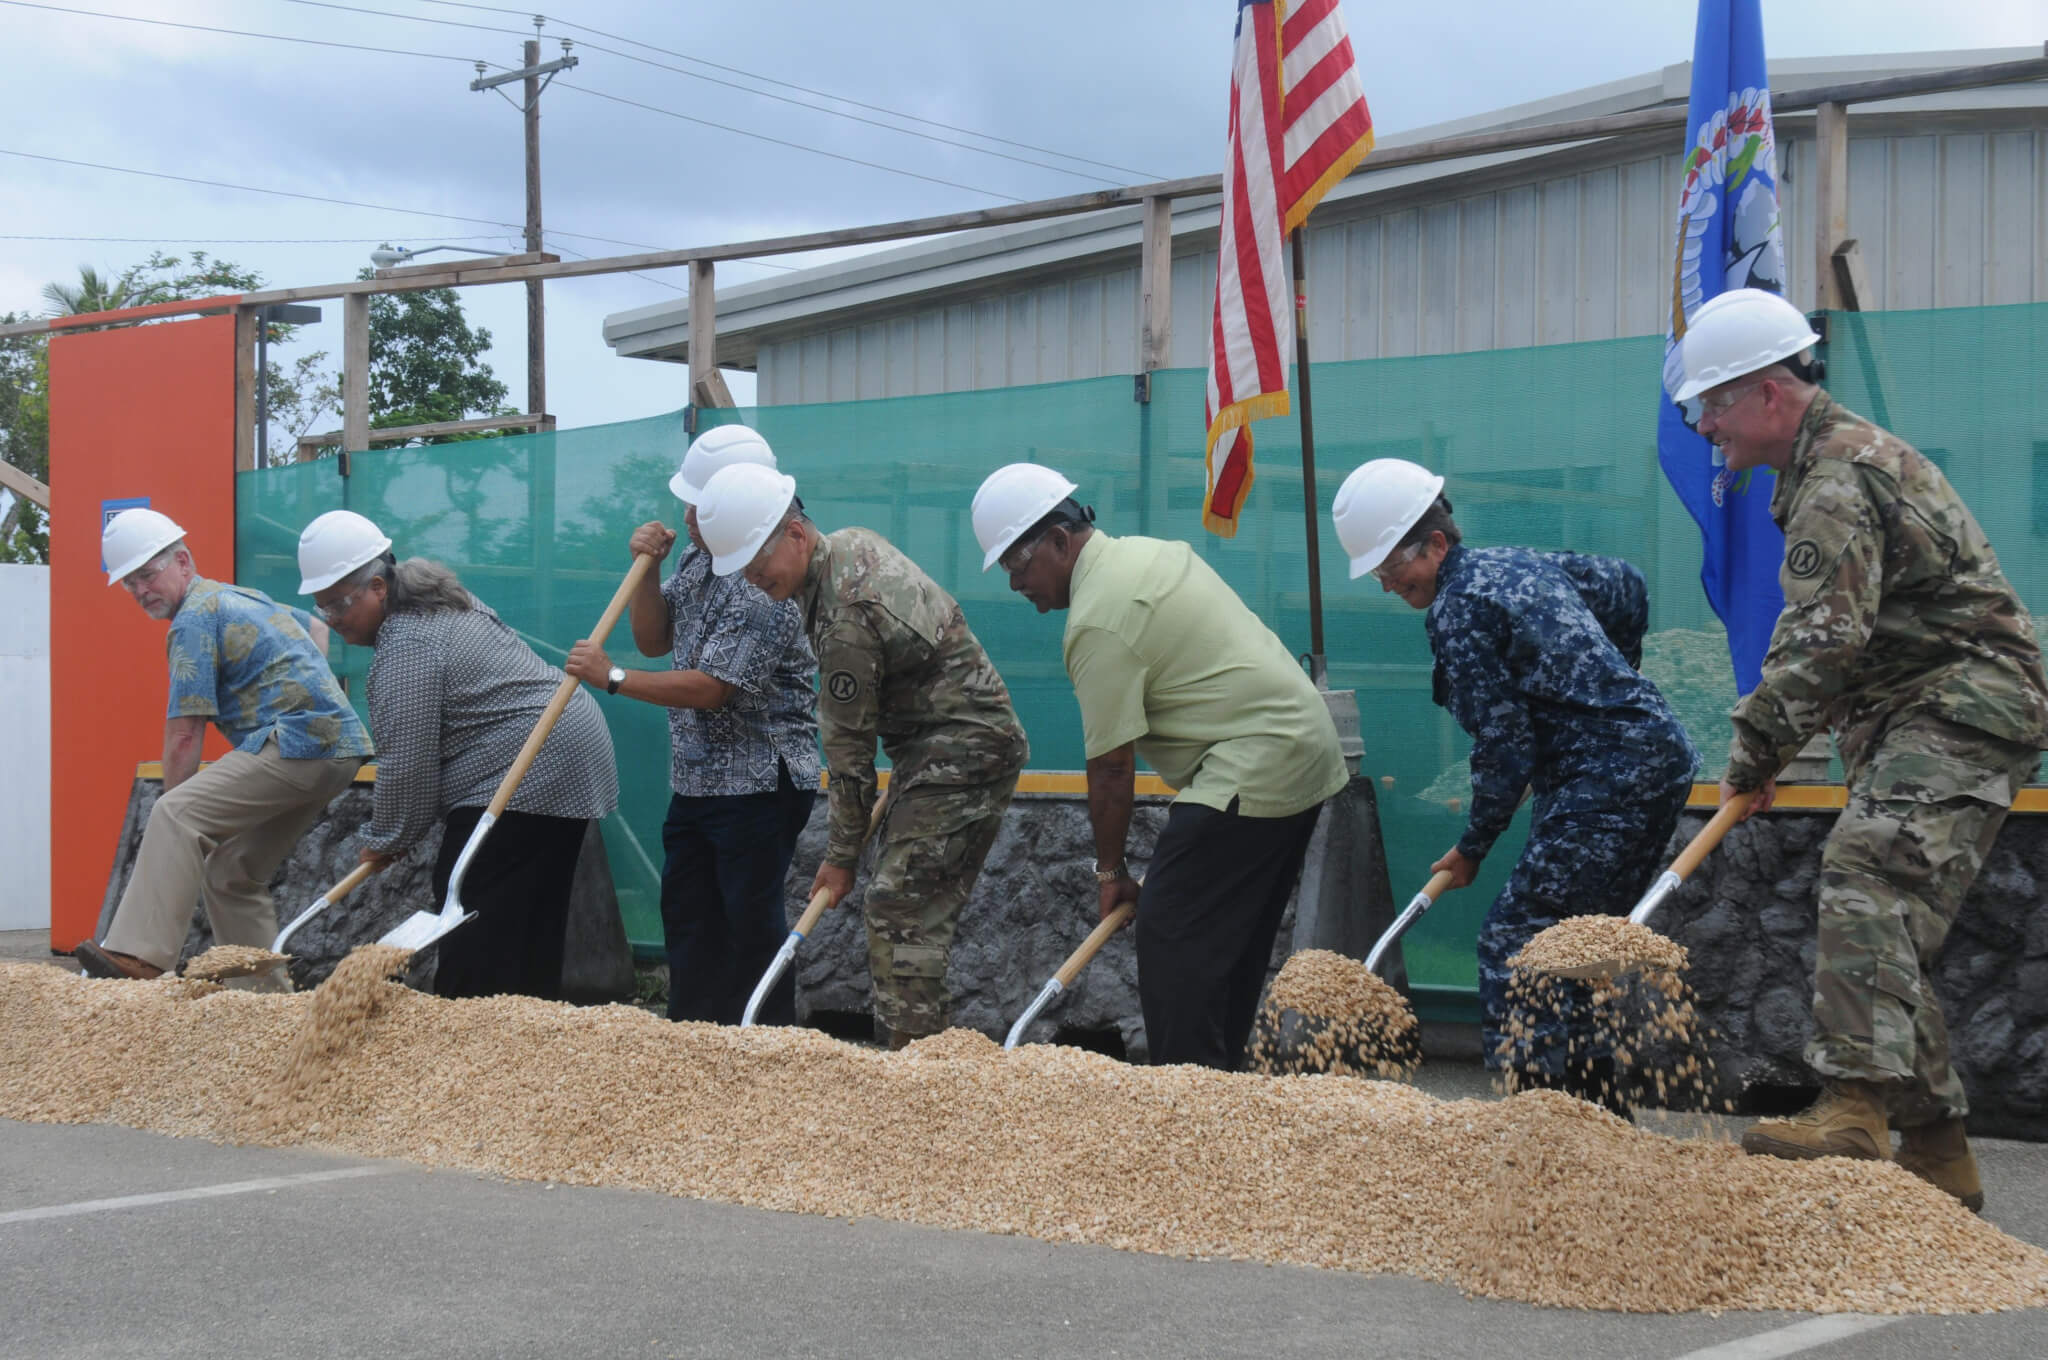 Brig. Gen. Stephen K. Curda, commander of the 9th Mission Support Command was in attendance of the Saipan U.S. Army Reserve Center's groundbreaking ceremony, July 11, 2016. Along with the commander, in attendance was the Lt. Governor, Commonwealth of the Northern Mariana Islandes, the Honorable Victor Hocog, other state officials and management personnel from Aafes. The center will be undergoing a full revitalization to its complex, enhancing the capabilities of the center to include upgraded storm protection, security systems and upgrades to the air conditioning system. The attached Aafes Troop Store will also be receiving a facelift by upgrading the store by 3 times larger than the existing store in order to more effectively serve Soldiers, Families and Veterans. Project completion is scheduled for March 2017. U.S. Army photo by Sgt. Jessica A. DuVernay